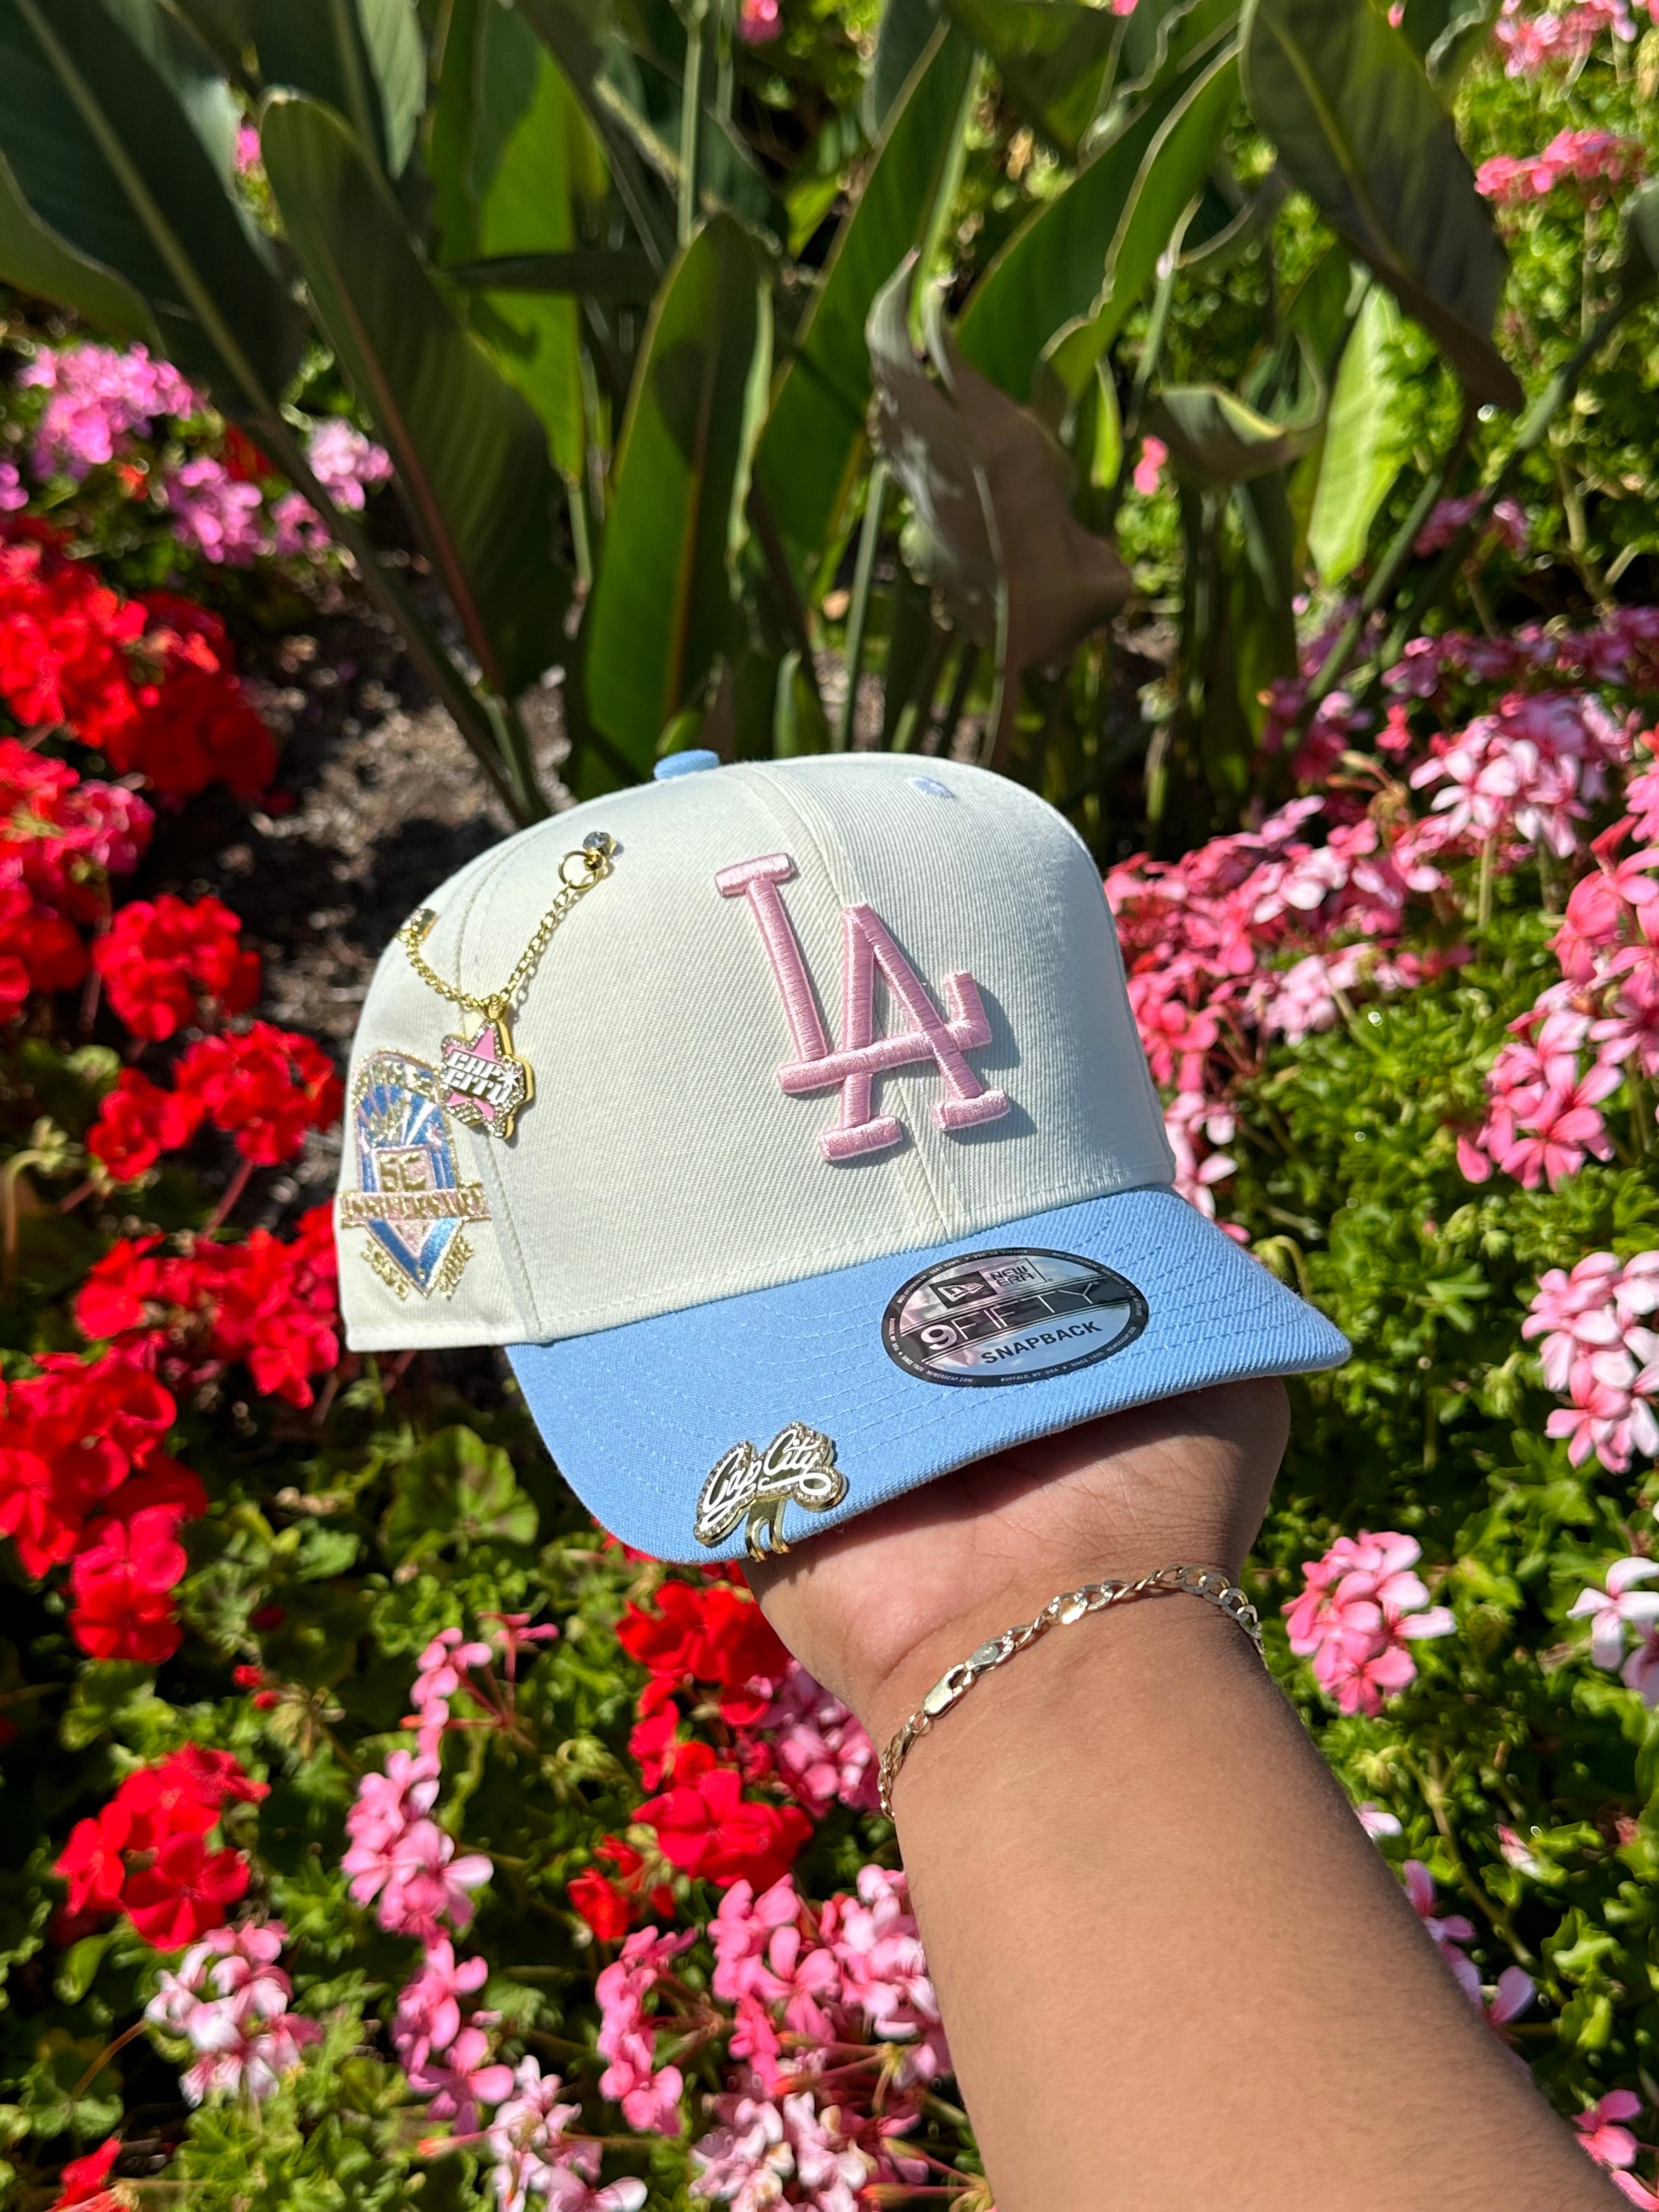 NEW ERA EXCLUSIVE 9FIFTY CHROME WHITE/ICY BLUE LOS ANGELES DODGERS SNAPBACK W/ 50TH ANNIVERSARY PATCH